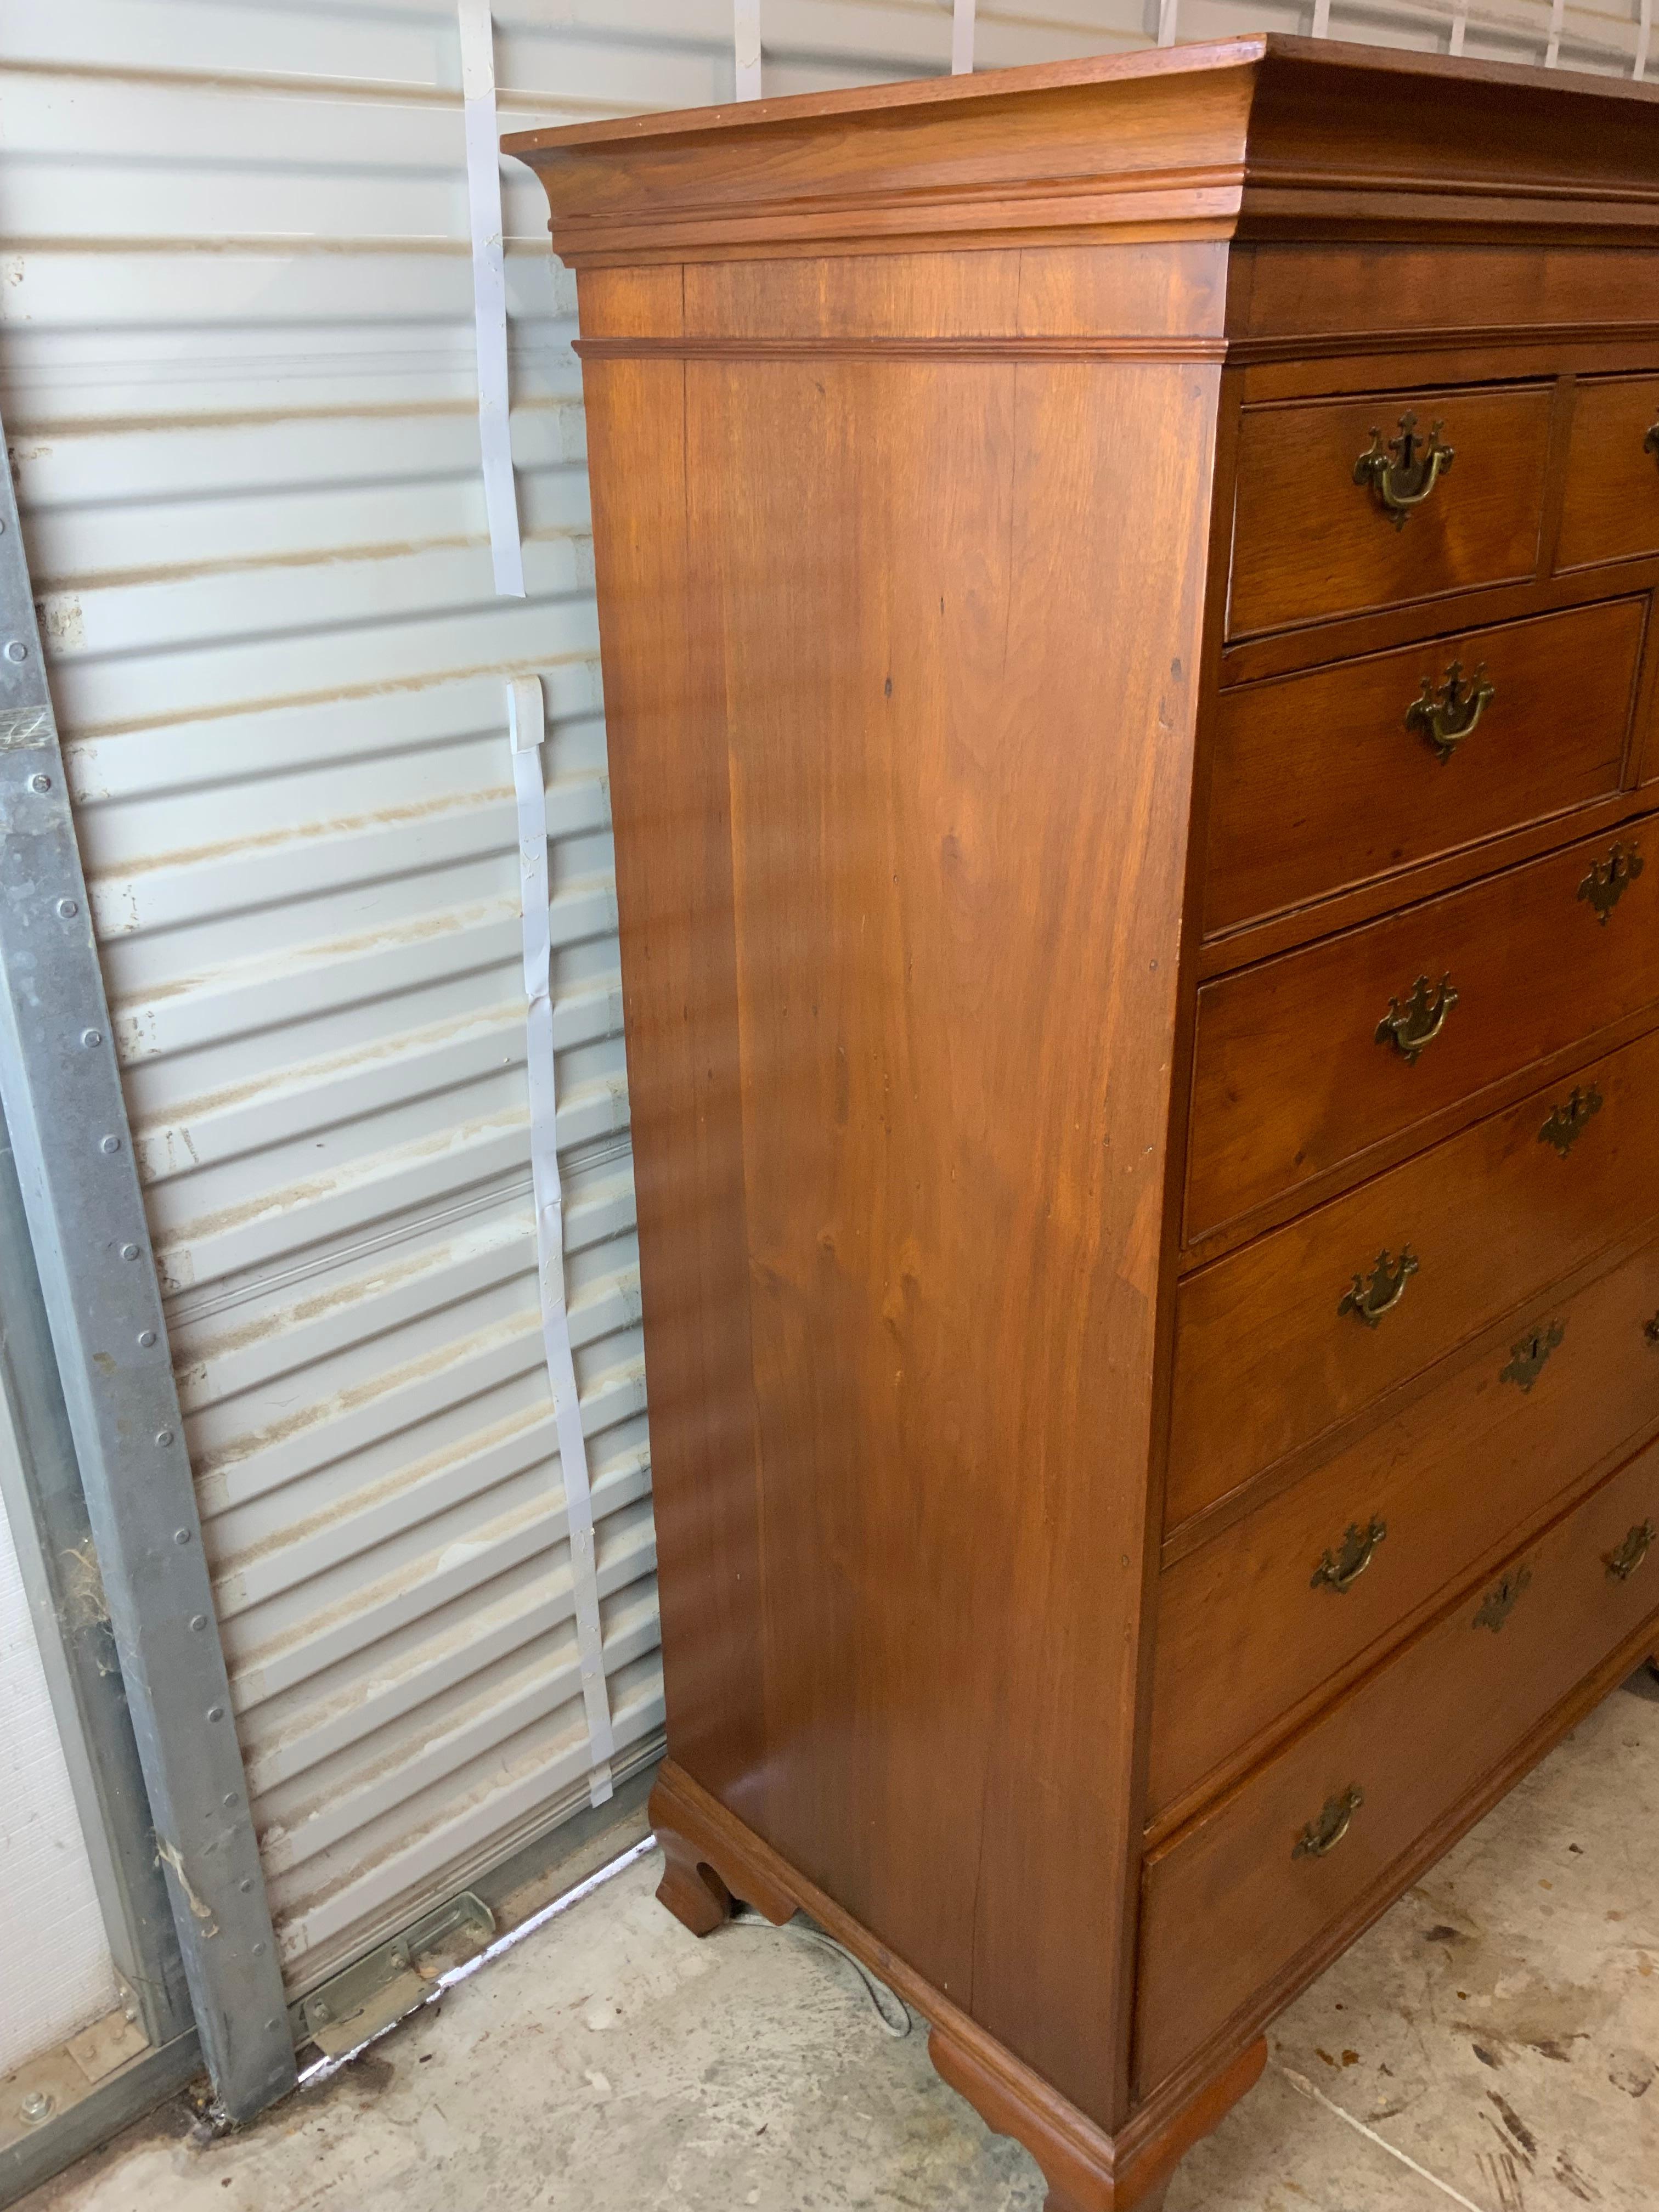 Very nice 18th century Pennsylvania Walnut tall chest. This piece has an old refinish with a great color and patina to the aged solid Walnut case. Secondary woods on the drawers are white Pine and Poplar. Drawers are working nicely and all have dust